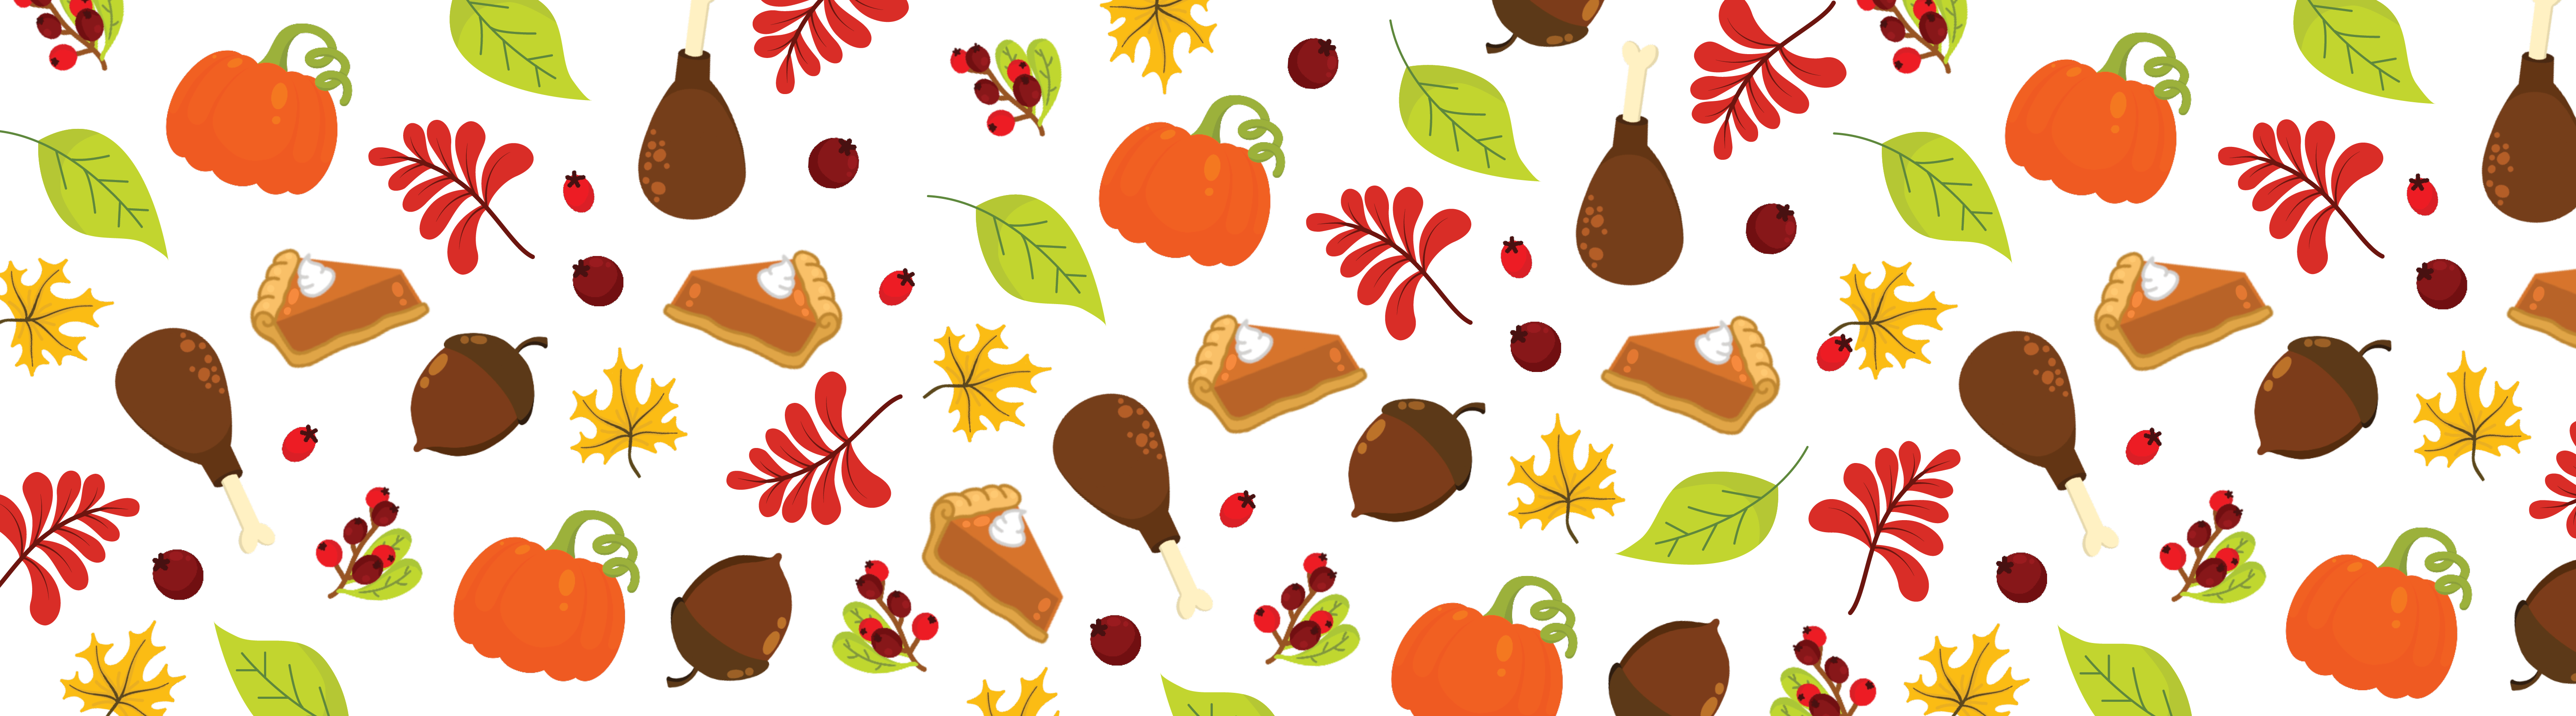 Pattern background with pumpkins, pie, acorns, and fall leaves